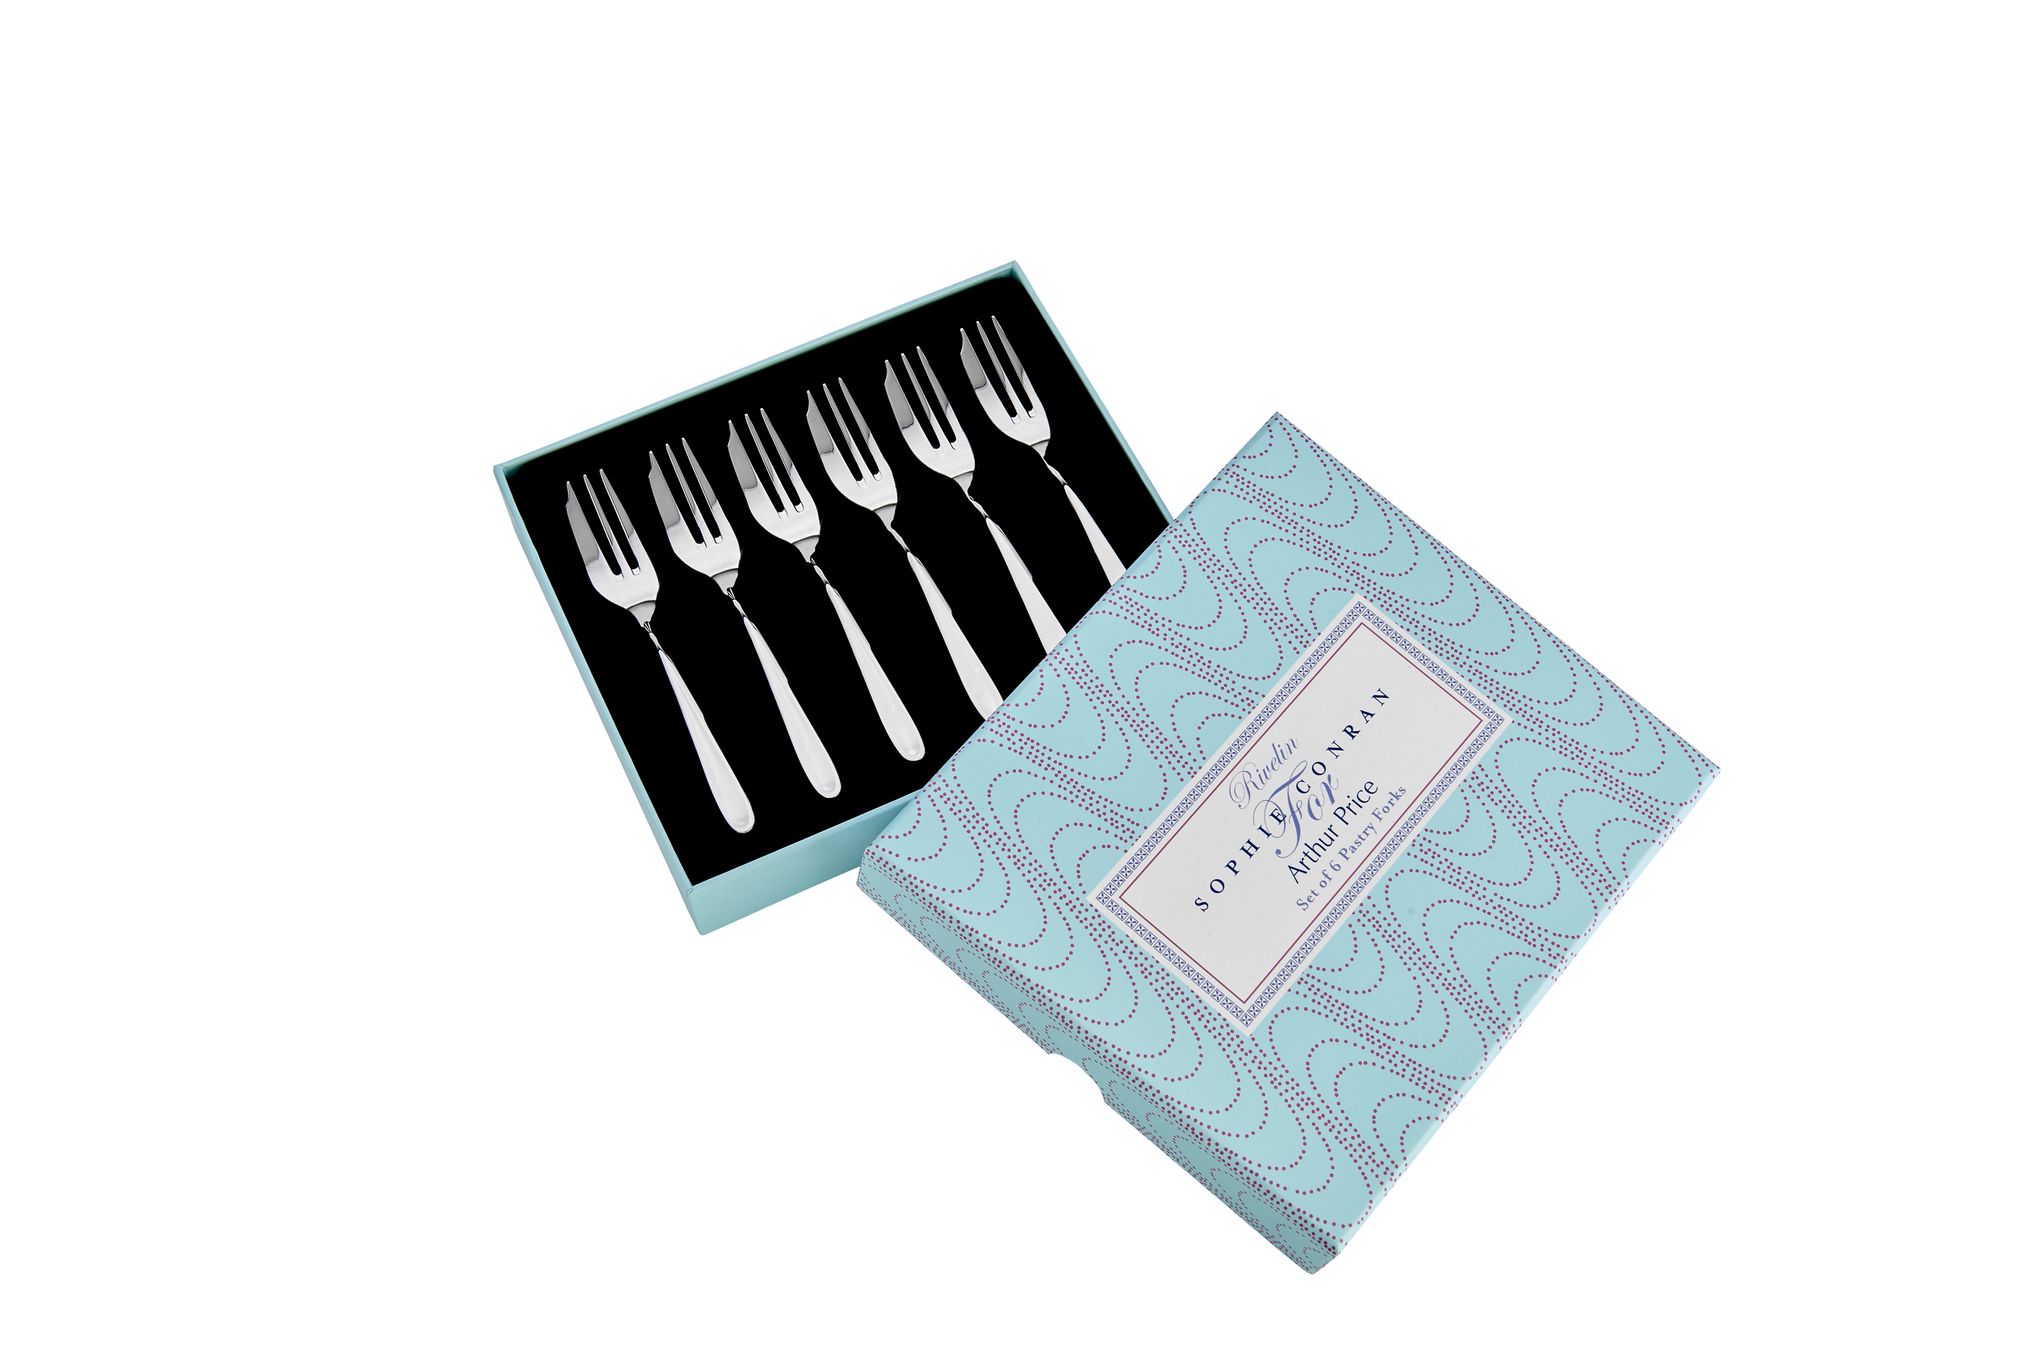 Arthur Price Sophie Conran Rivelin by Arthur Price Pastry Forks Set of 6 5031719011556 